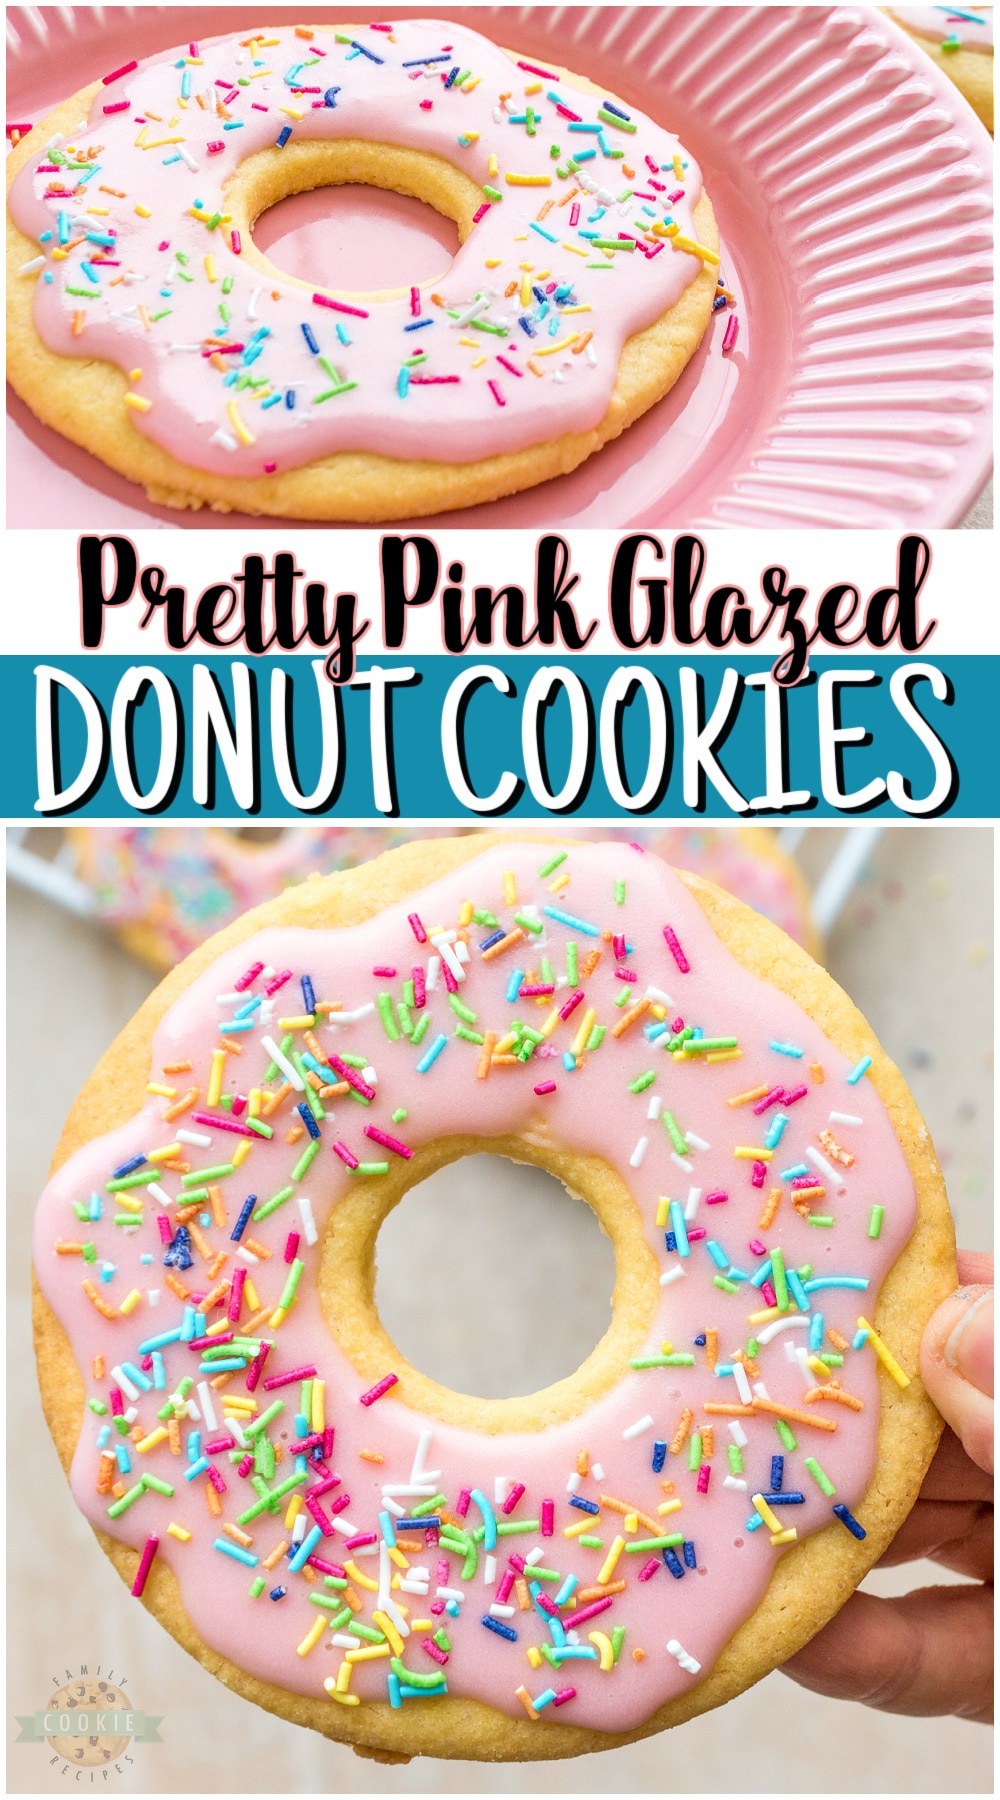 Pink donut cookies are cute sugar cookies frosted with pink glaze to look just like Sprinkled Pink Donuts! Cute donut cookies perfect for birthday parties, bridal showers, baby showers or any type of party!